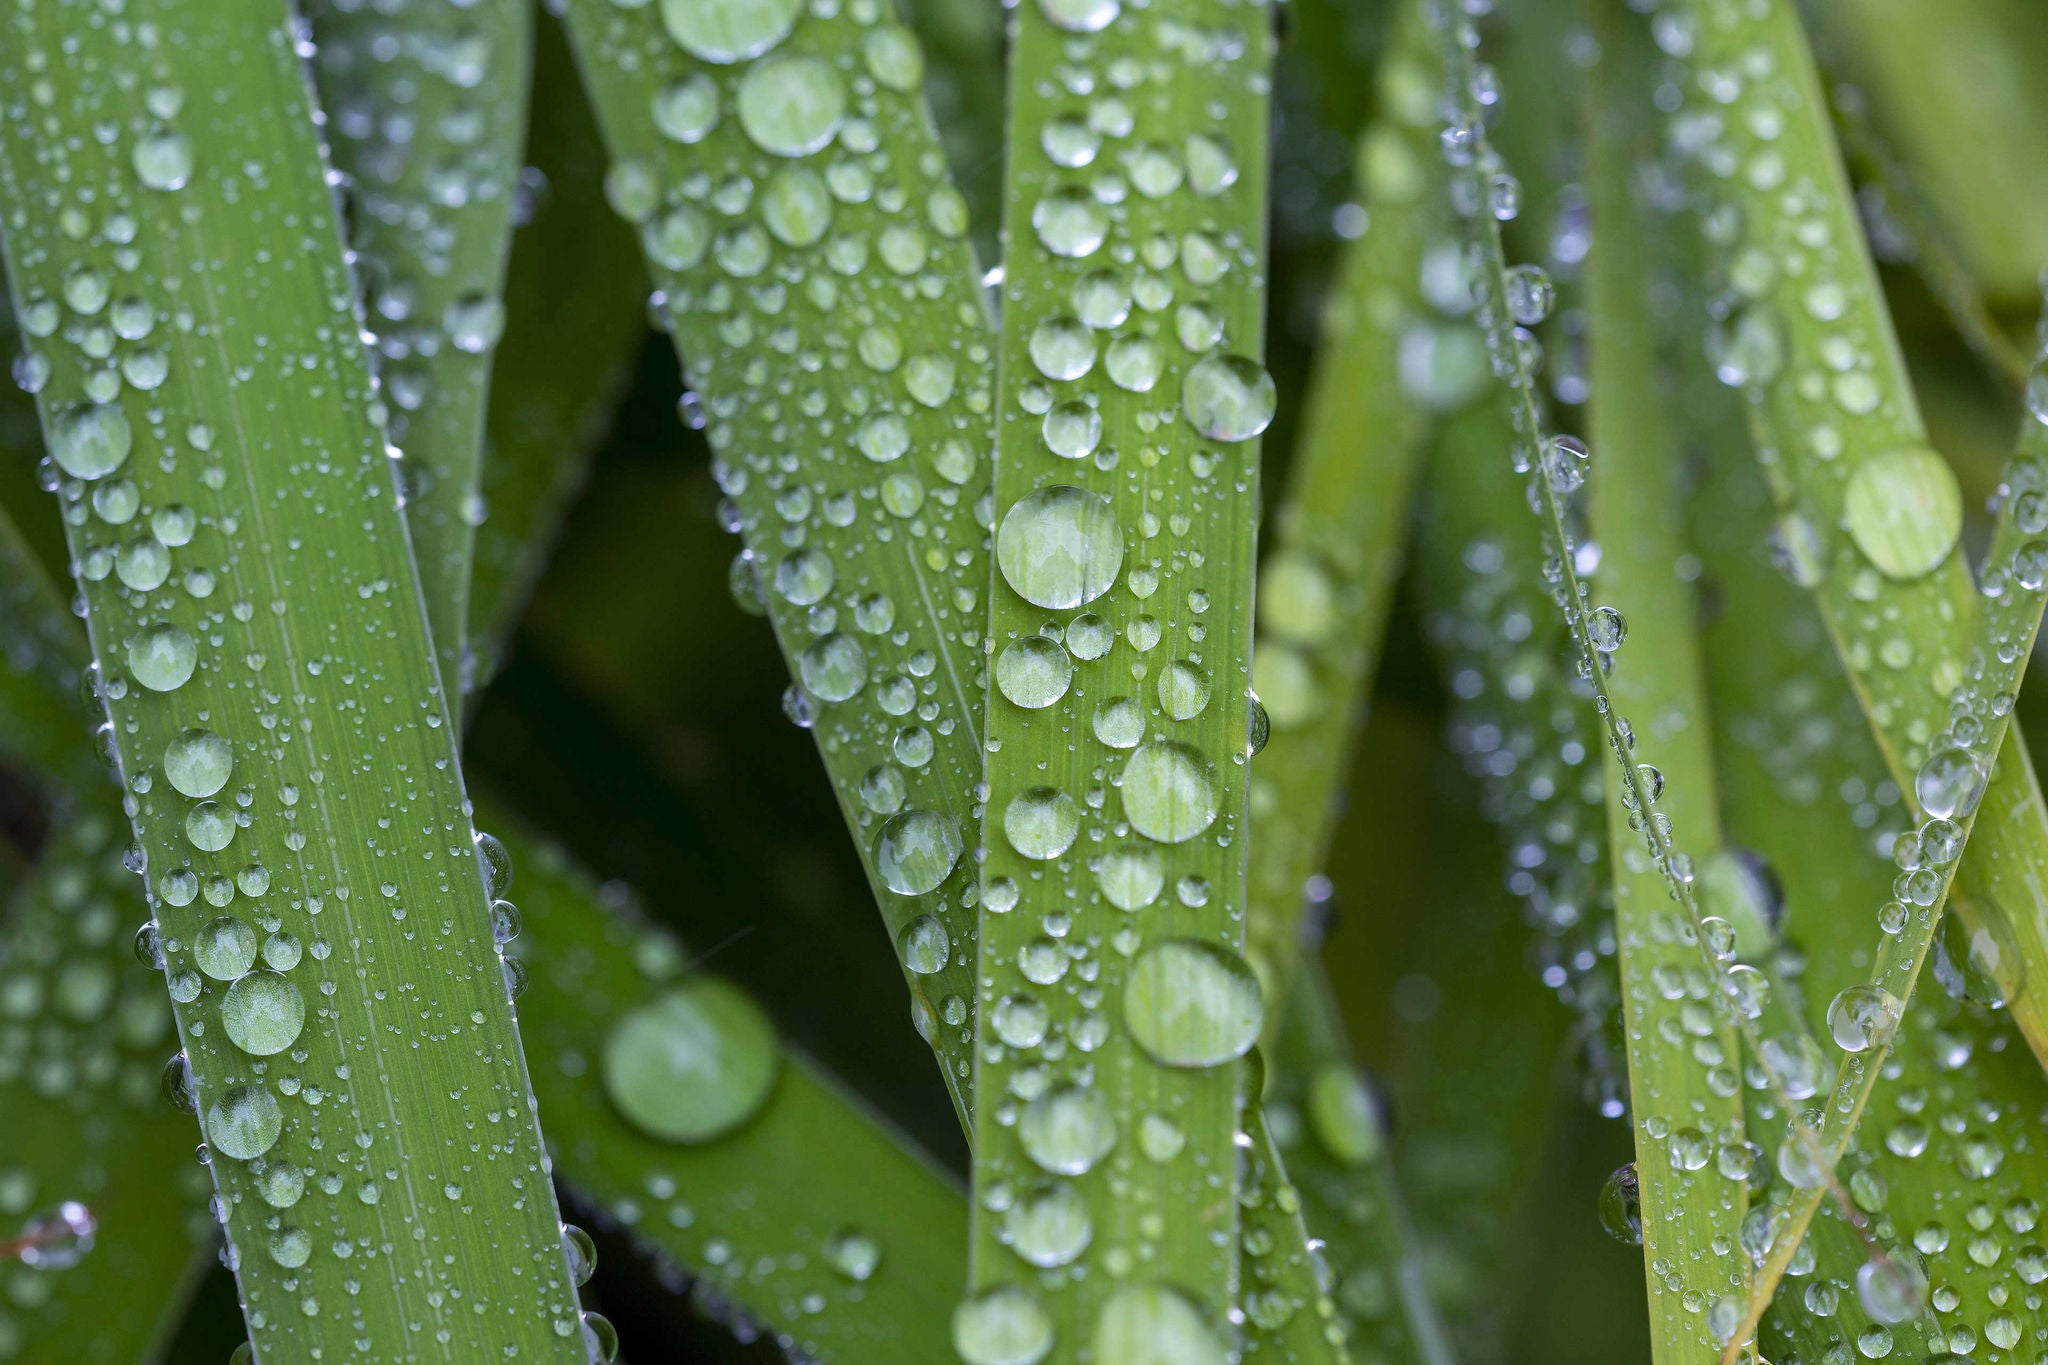 Water droplets over green plant